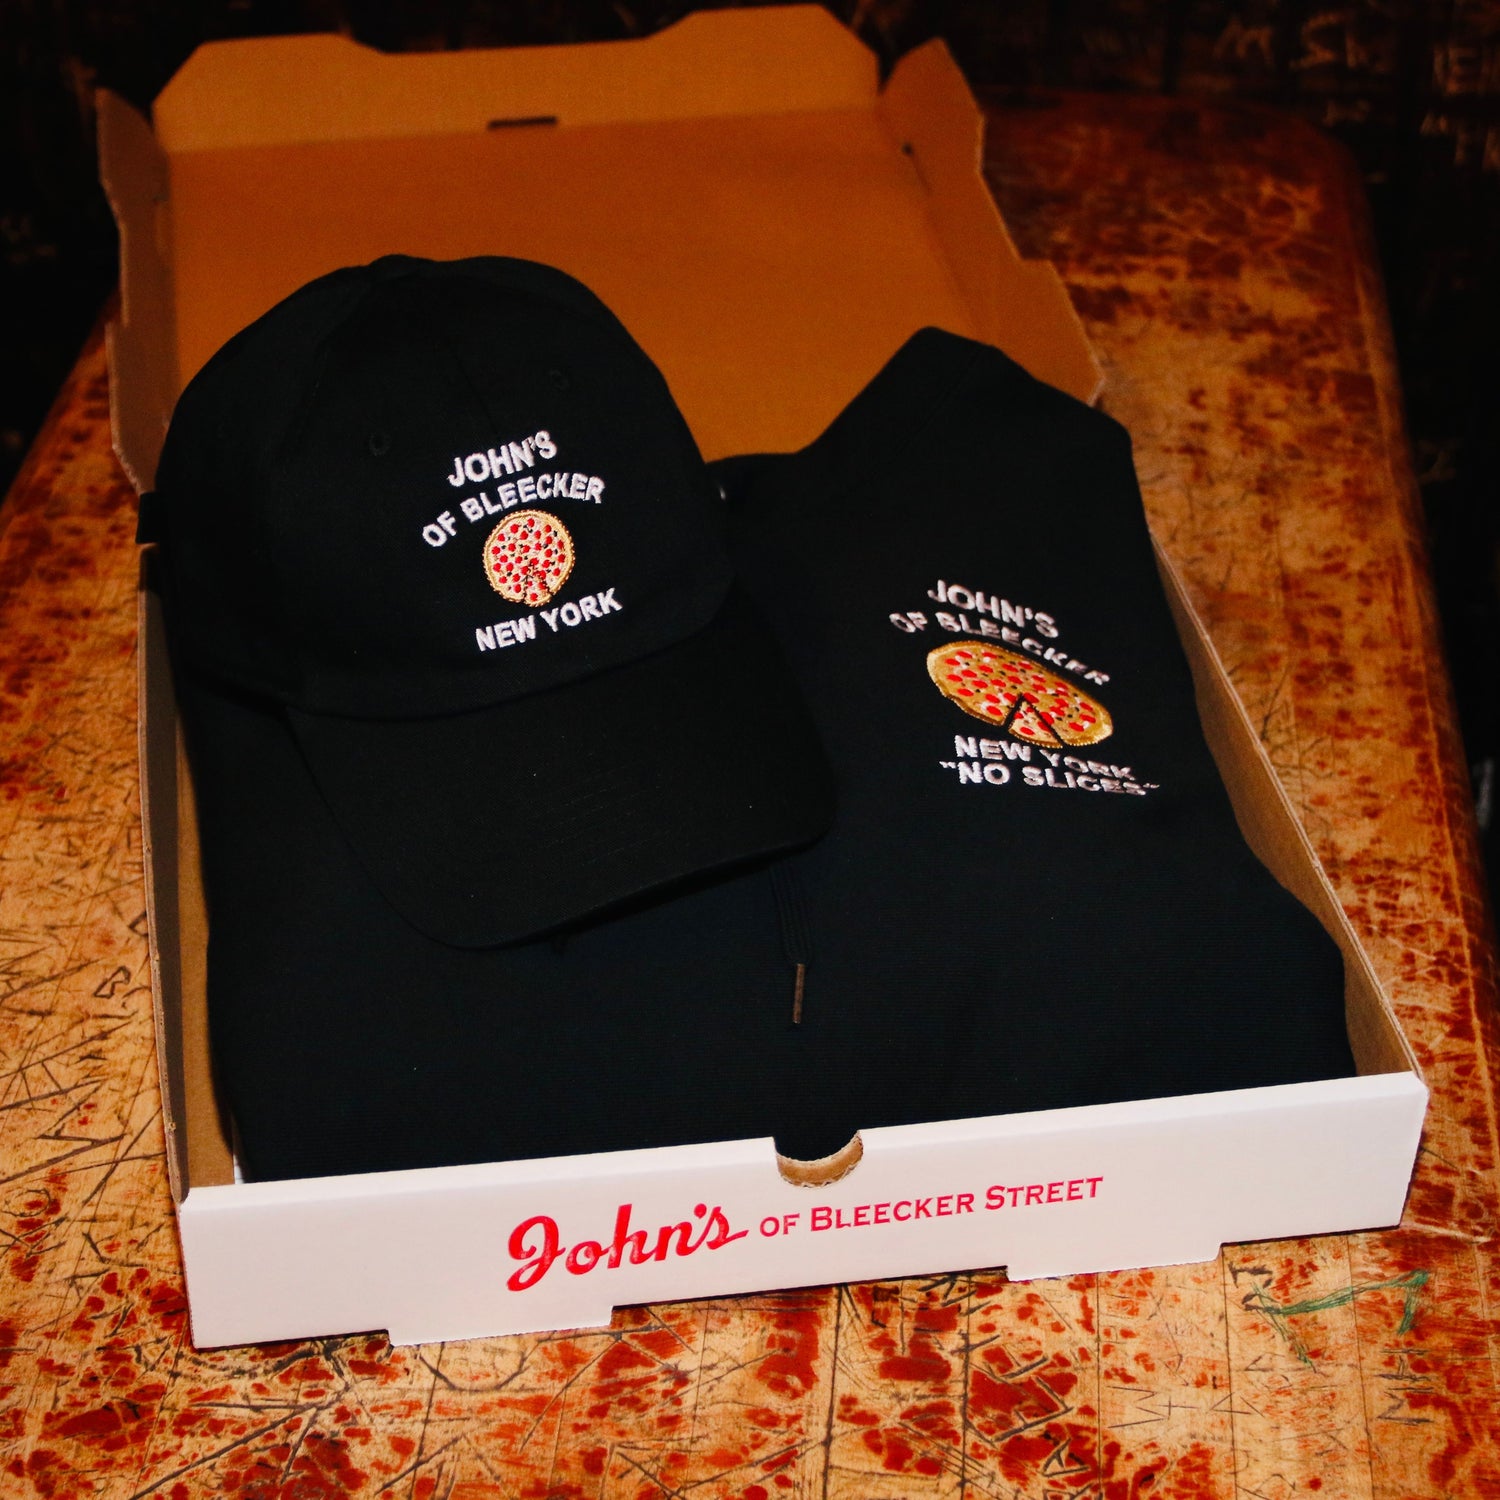 John's Pizza "No Slices" Hat  and the John's Pizza Hoodie inside of a pizza box